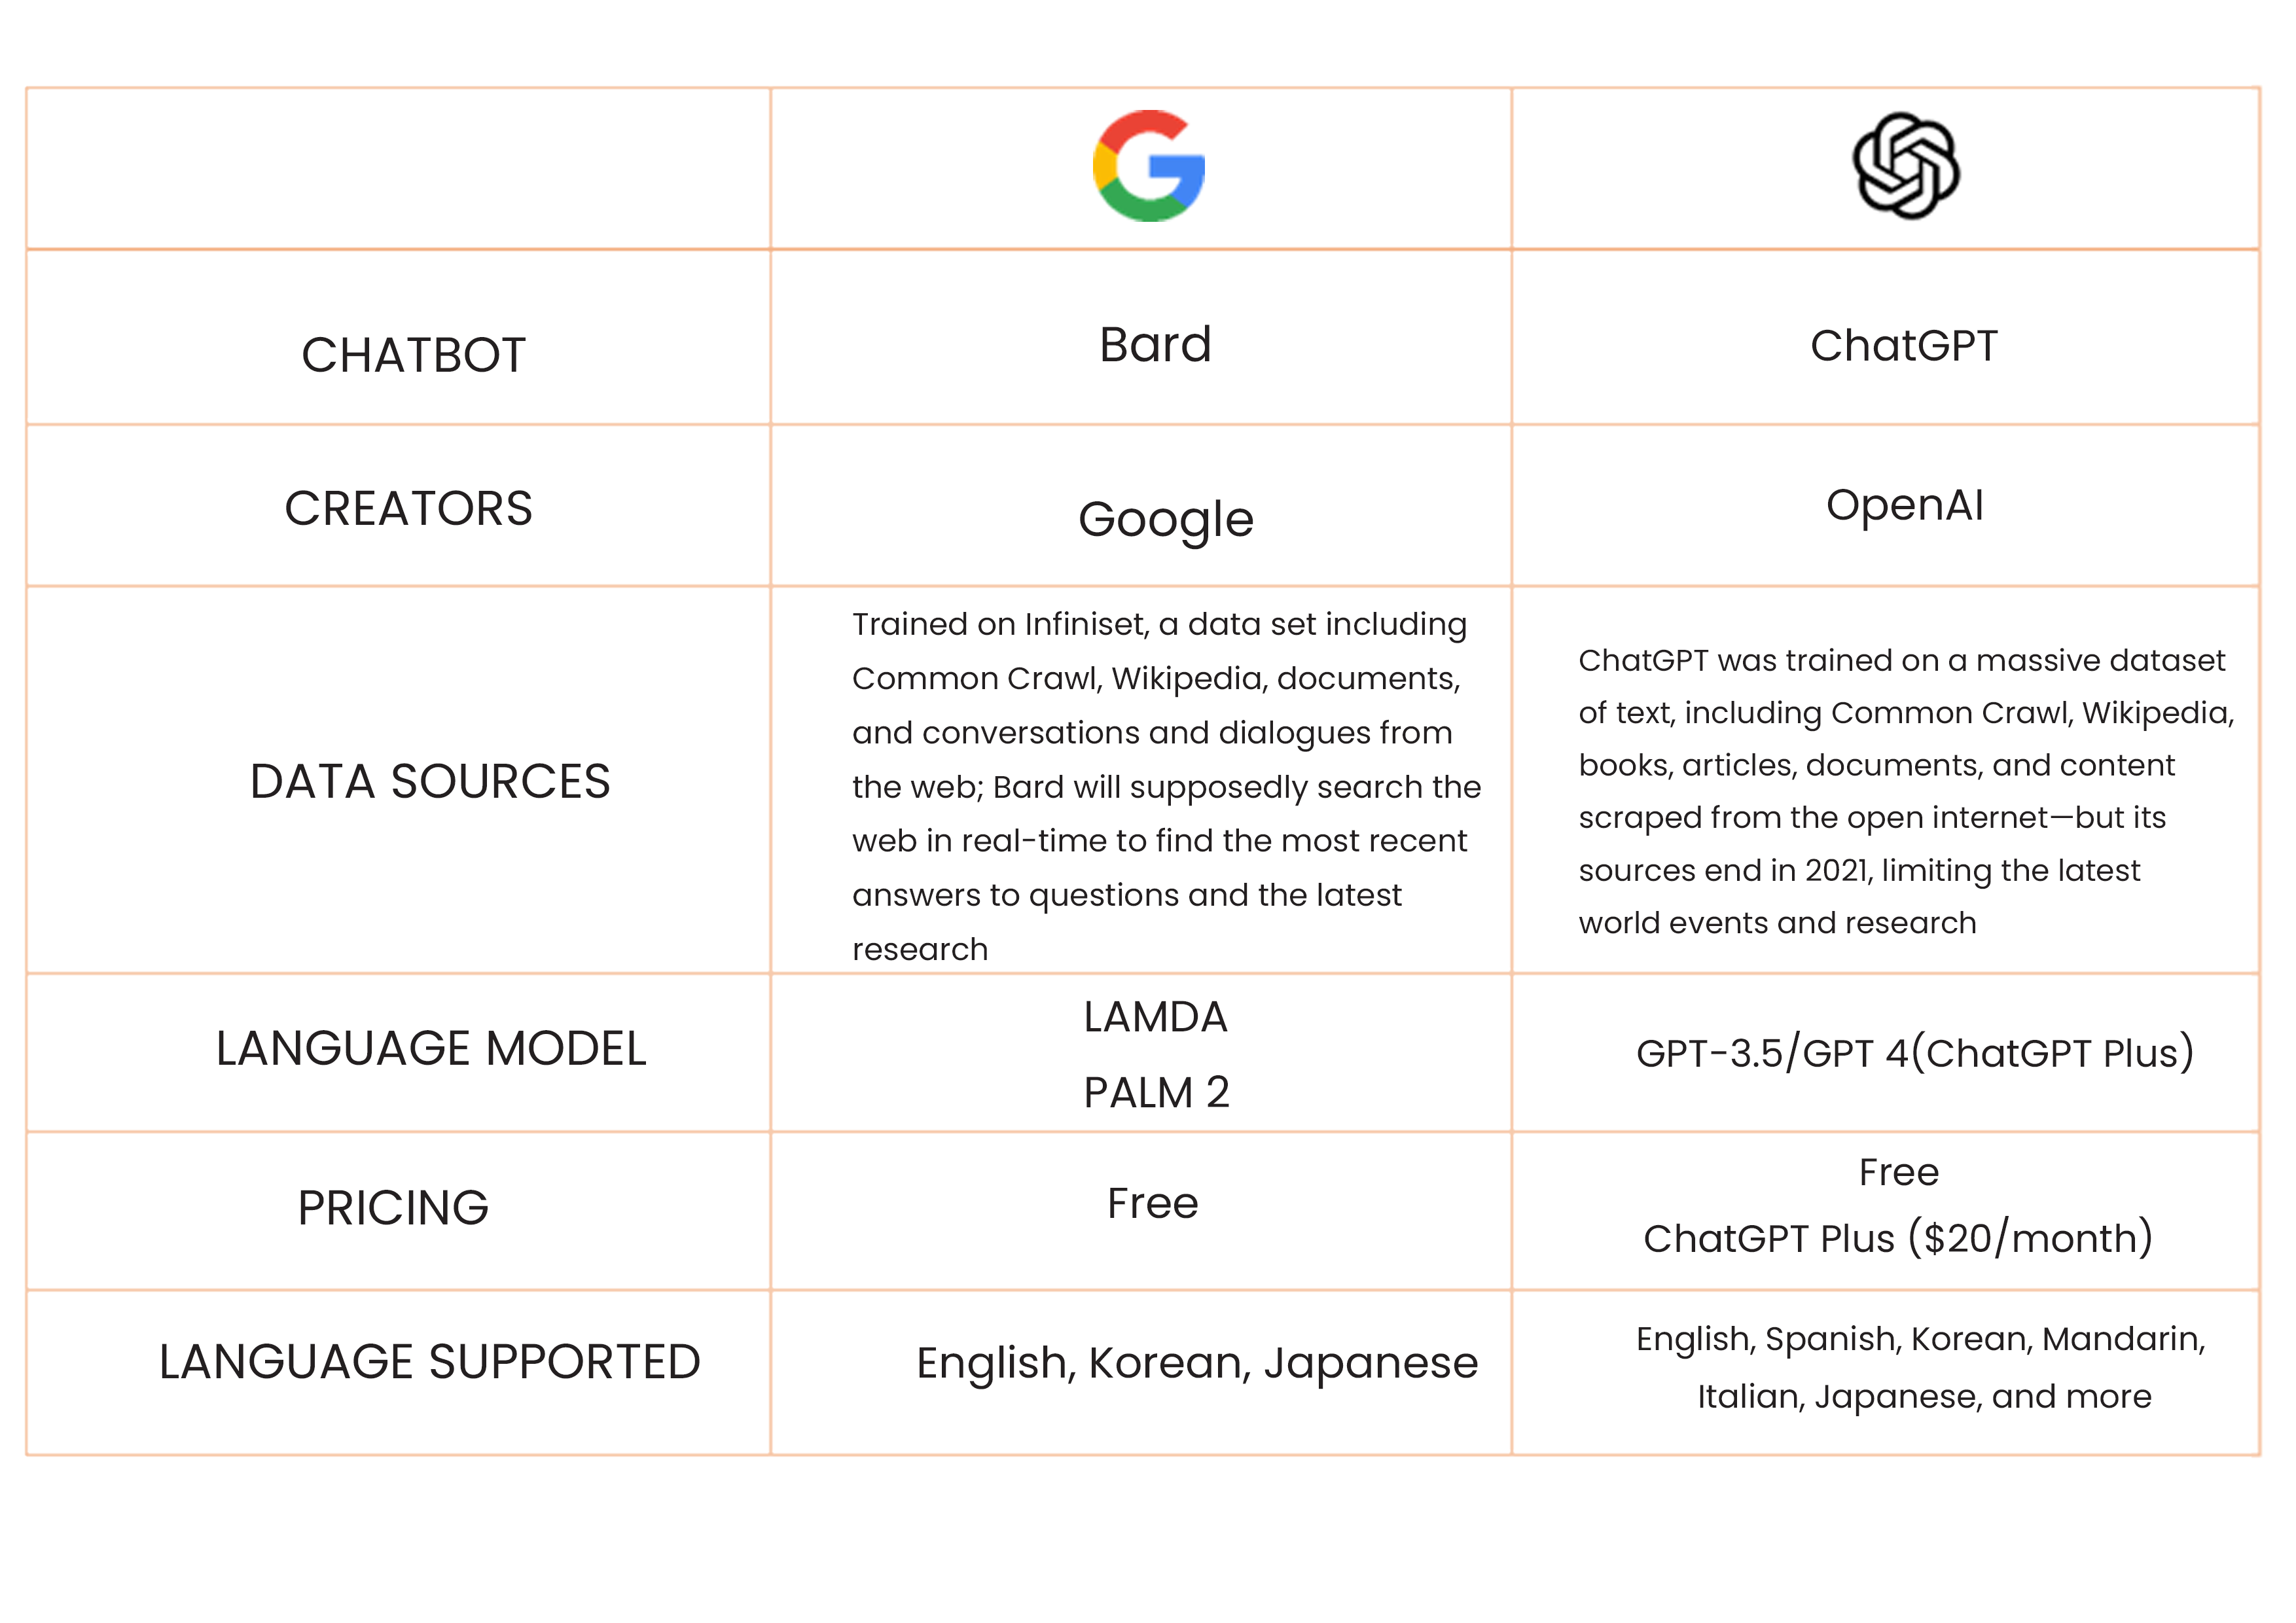 The table shows the significant characteristics of Google Bard and ChatGPT according to the name of a chatbot, creators, data sources, language model, pricing, and language supported